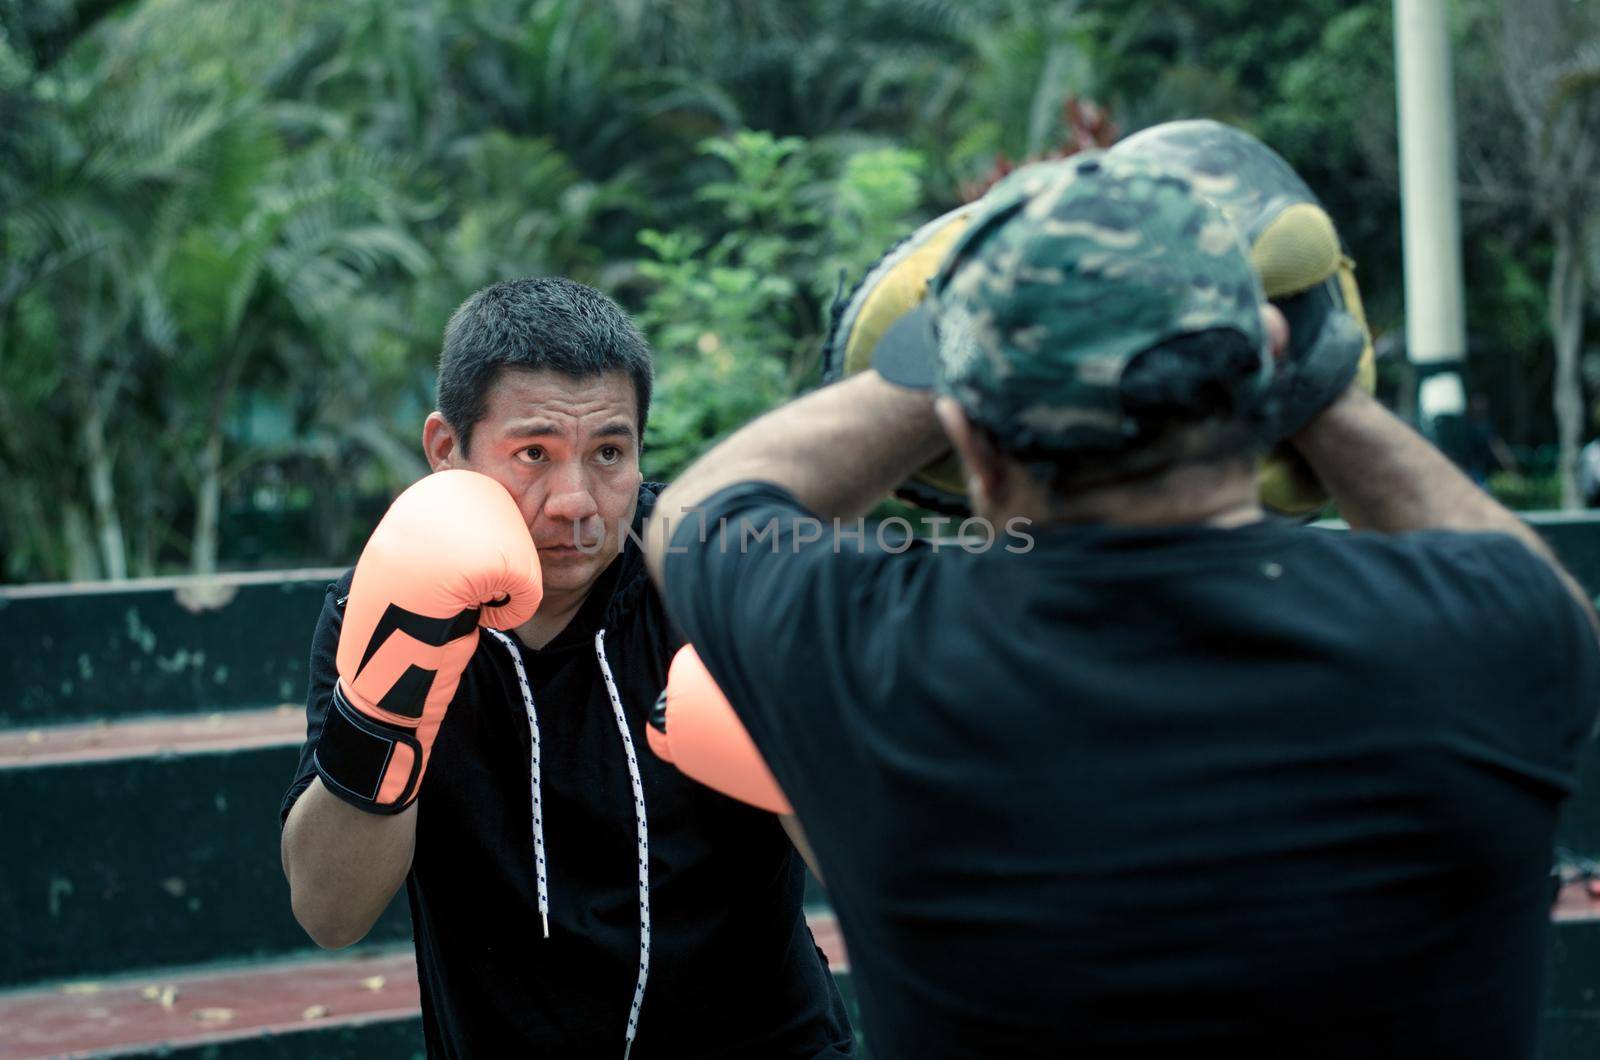 boxing outdoor workout with trainer, punching exercises with personal coach